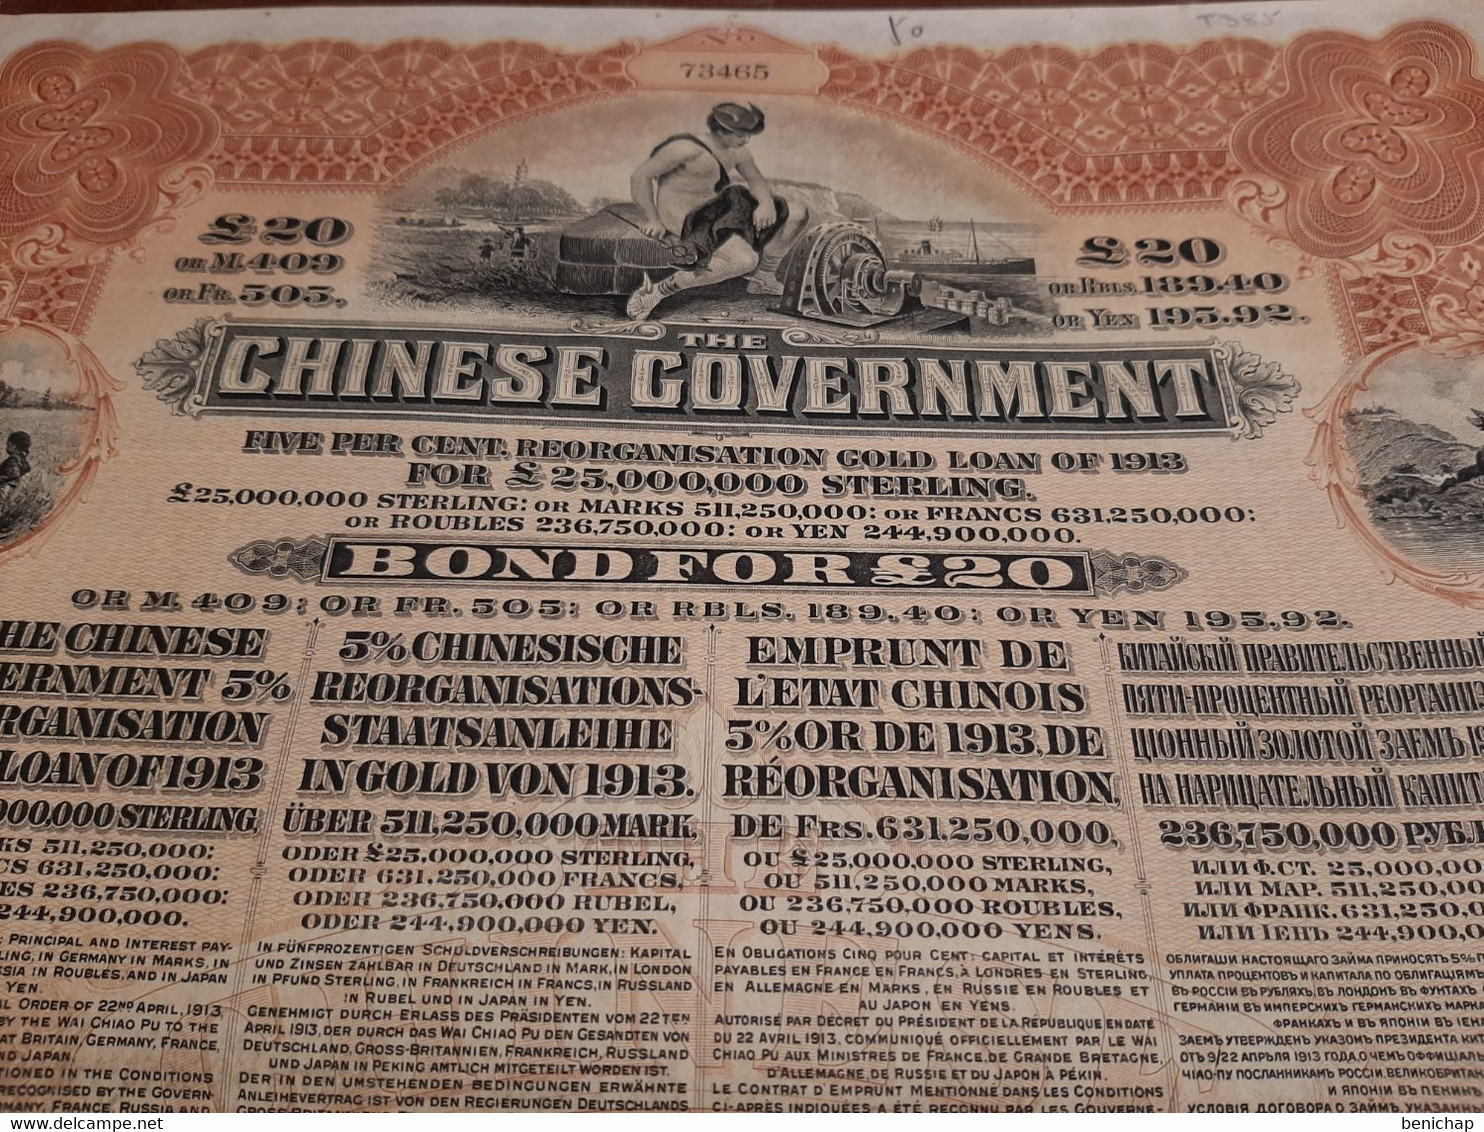 1913 - Chine - China - Chinese-Chinese Government Emprunt De L'Etat Chinois 5% - Hong Kong & Shanghai Banking In London. - Asia